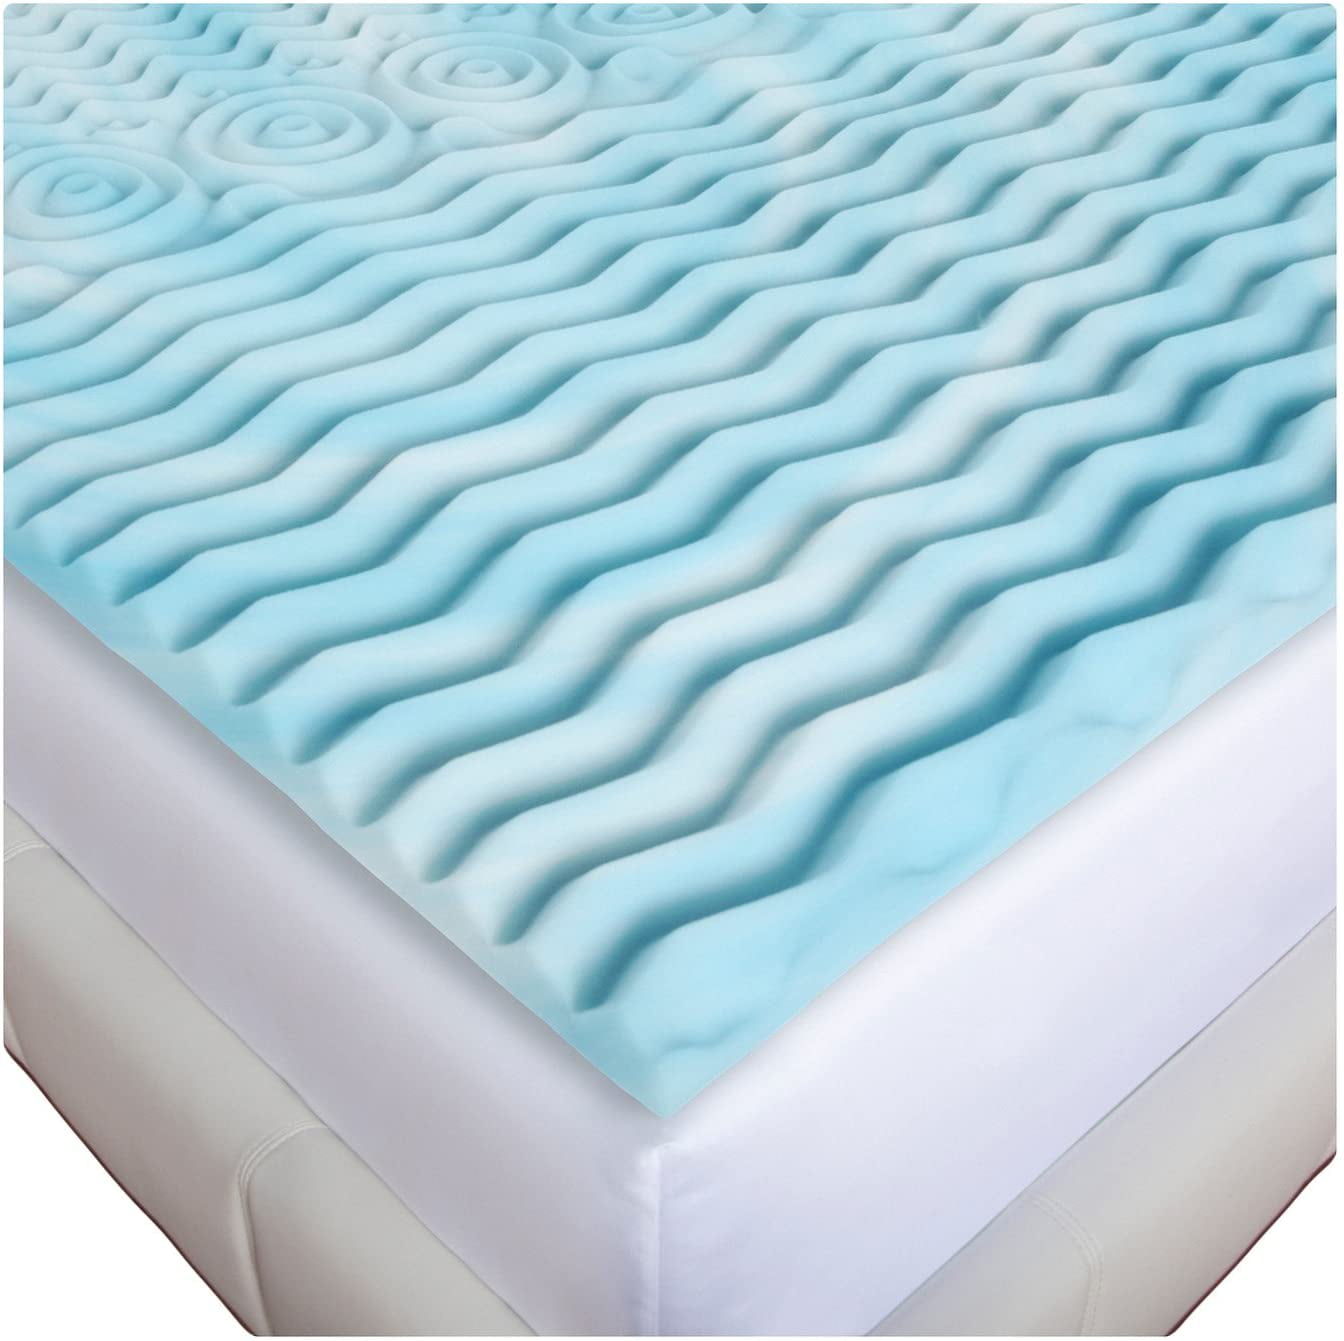 ORTHOPAEDIC 100% MEMORY FOAM MATTRESS TOPPER AVAILABLE SIZES KIDS & Adult 